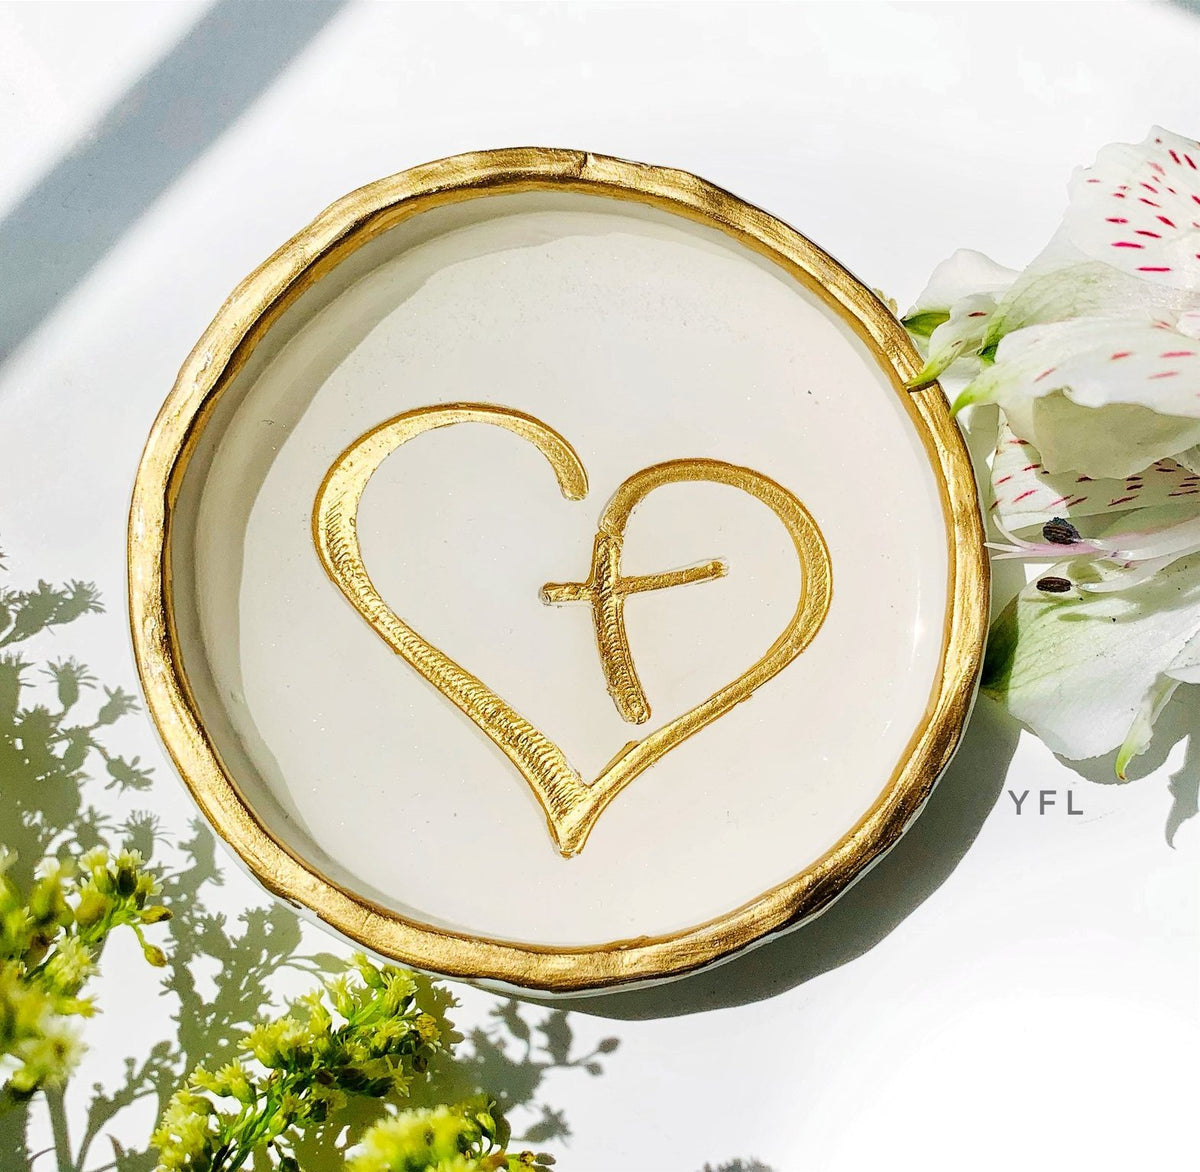 Cross Heart baptism communion religious gift Jewelry Dish | Ring Dish | Trinket Dish| Wedding Gift | Engagement Gift | Anniversary Gift | Bridal Shower | Housewarming | Gift for Her | Mother’s Day Teachers gift, Retirement gift, coworker gift